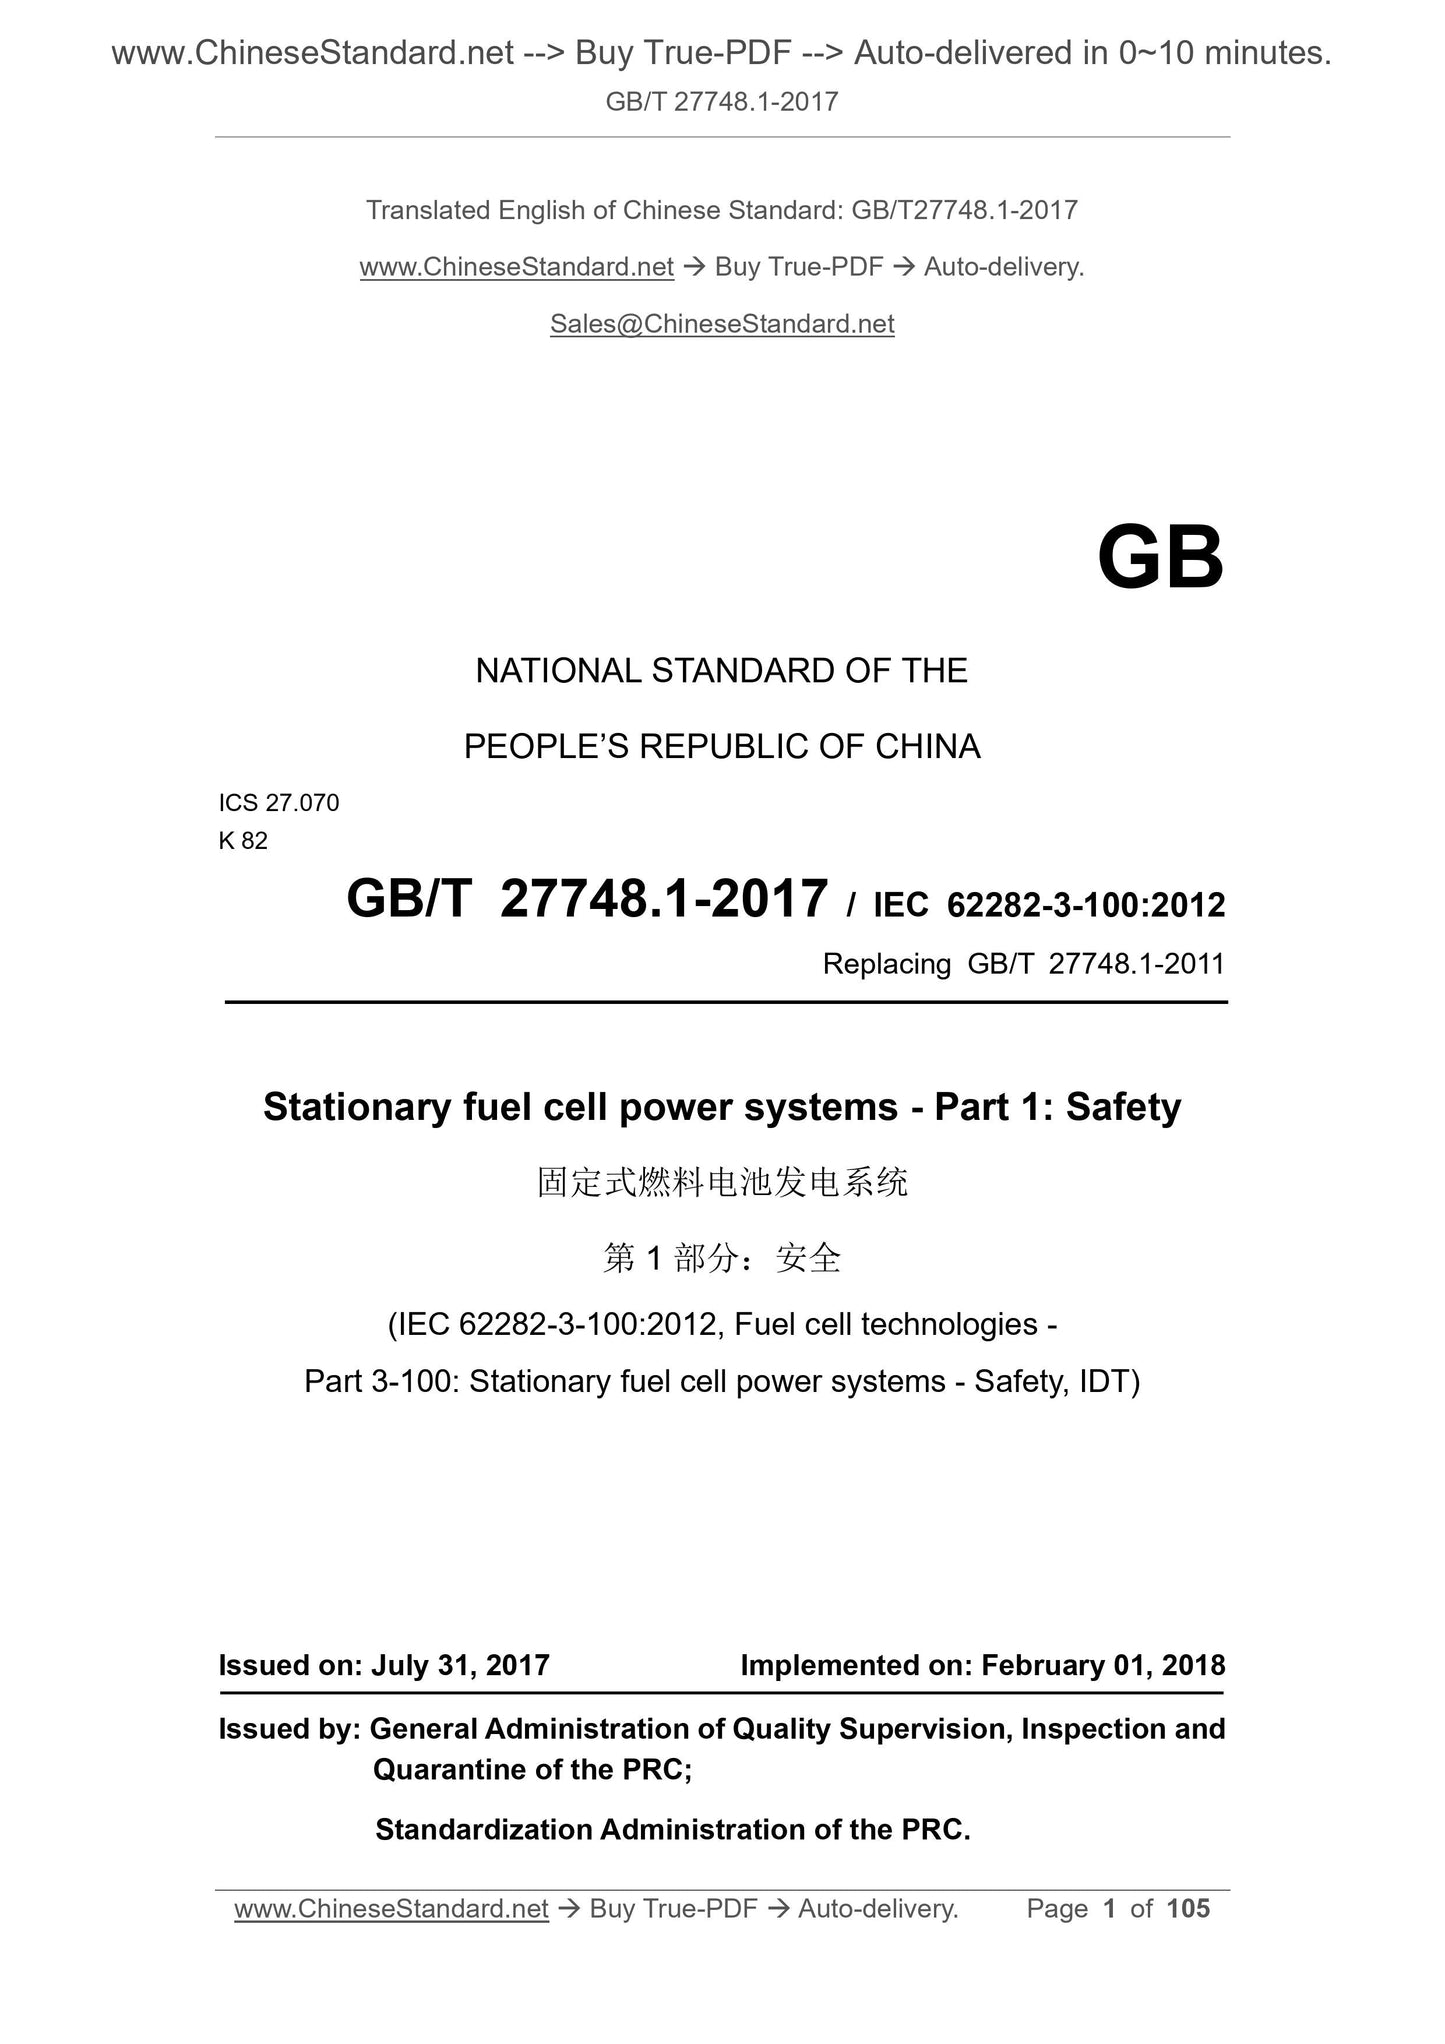 GB/T 27748.1-2017 Page 1